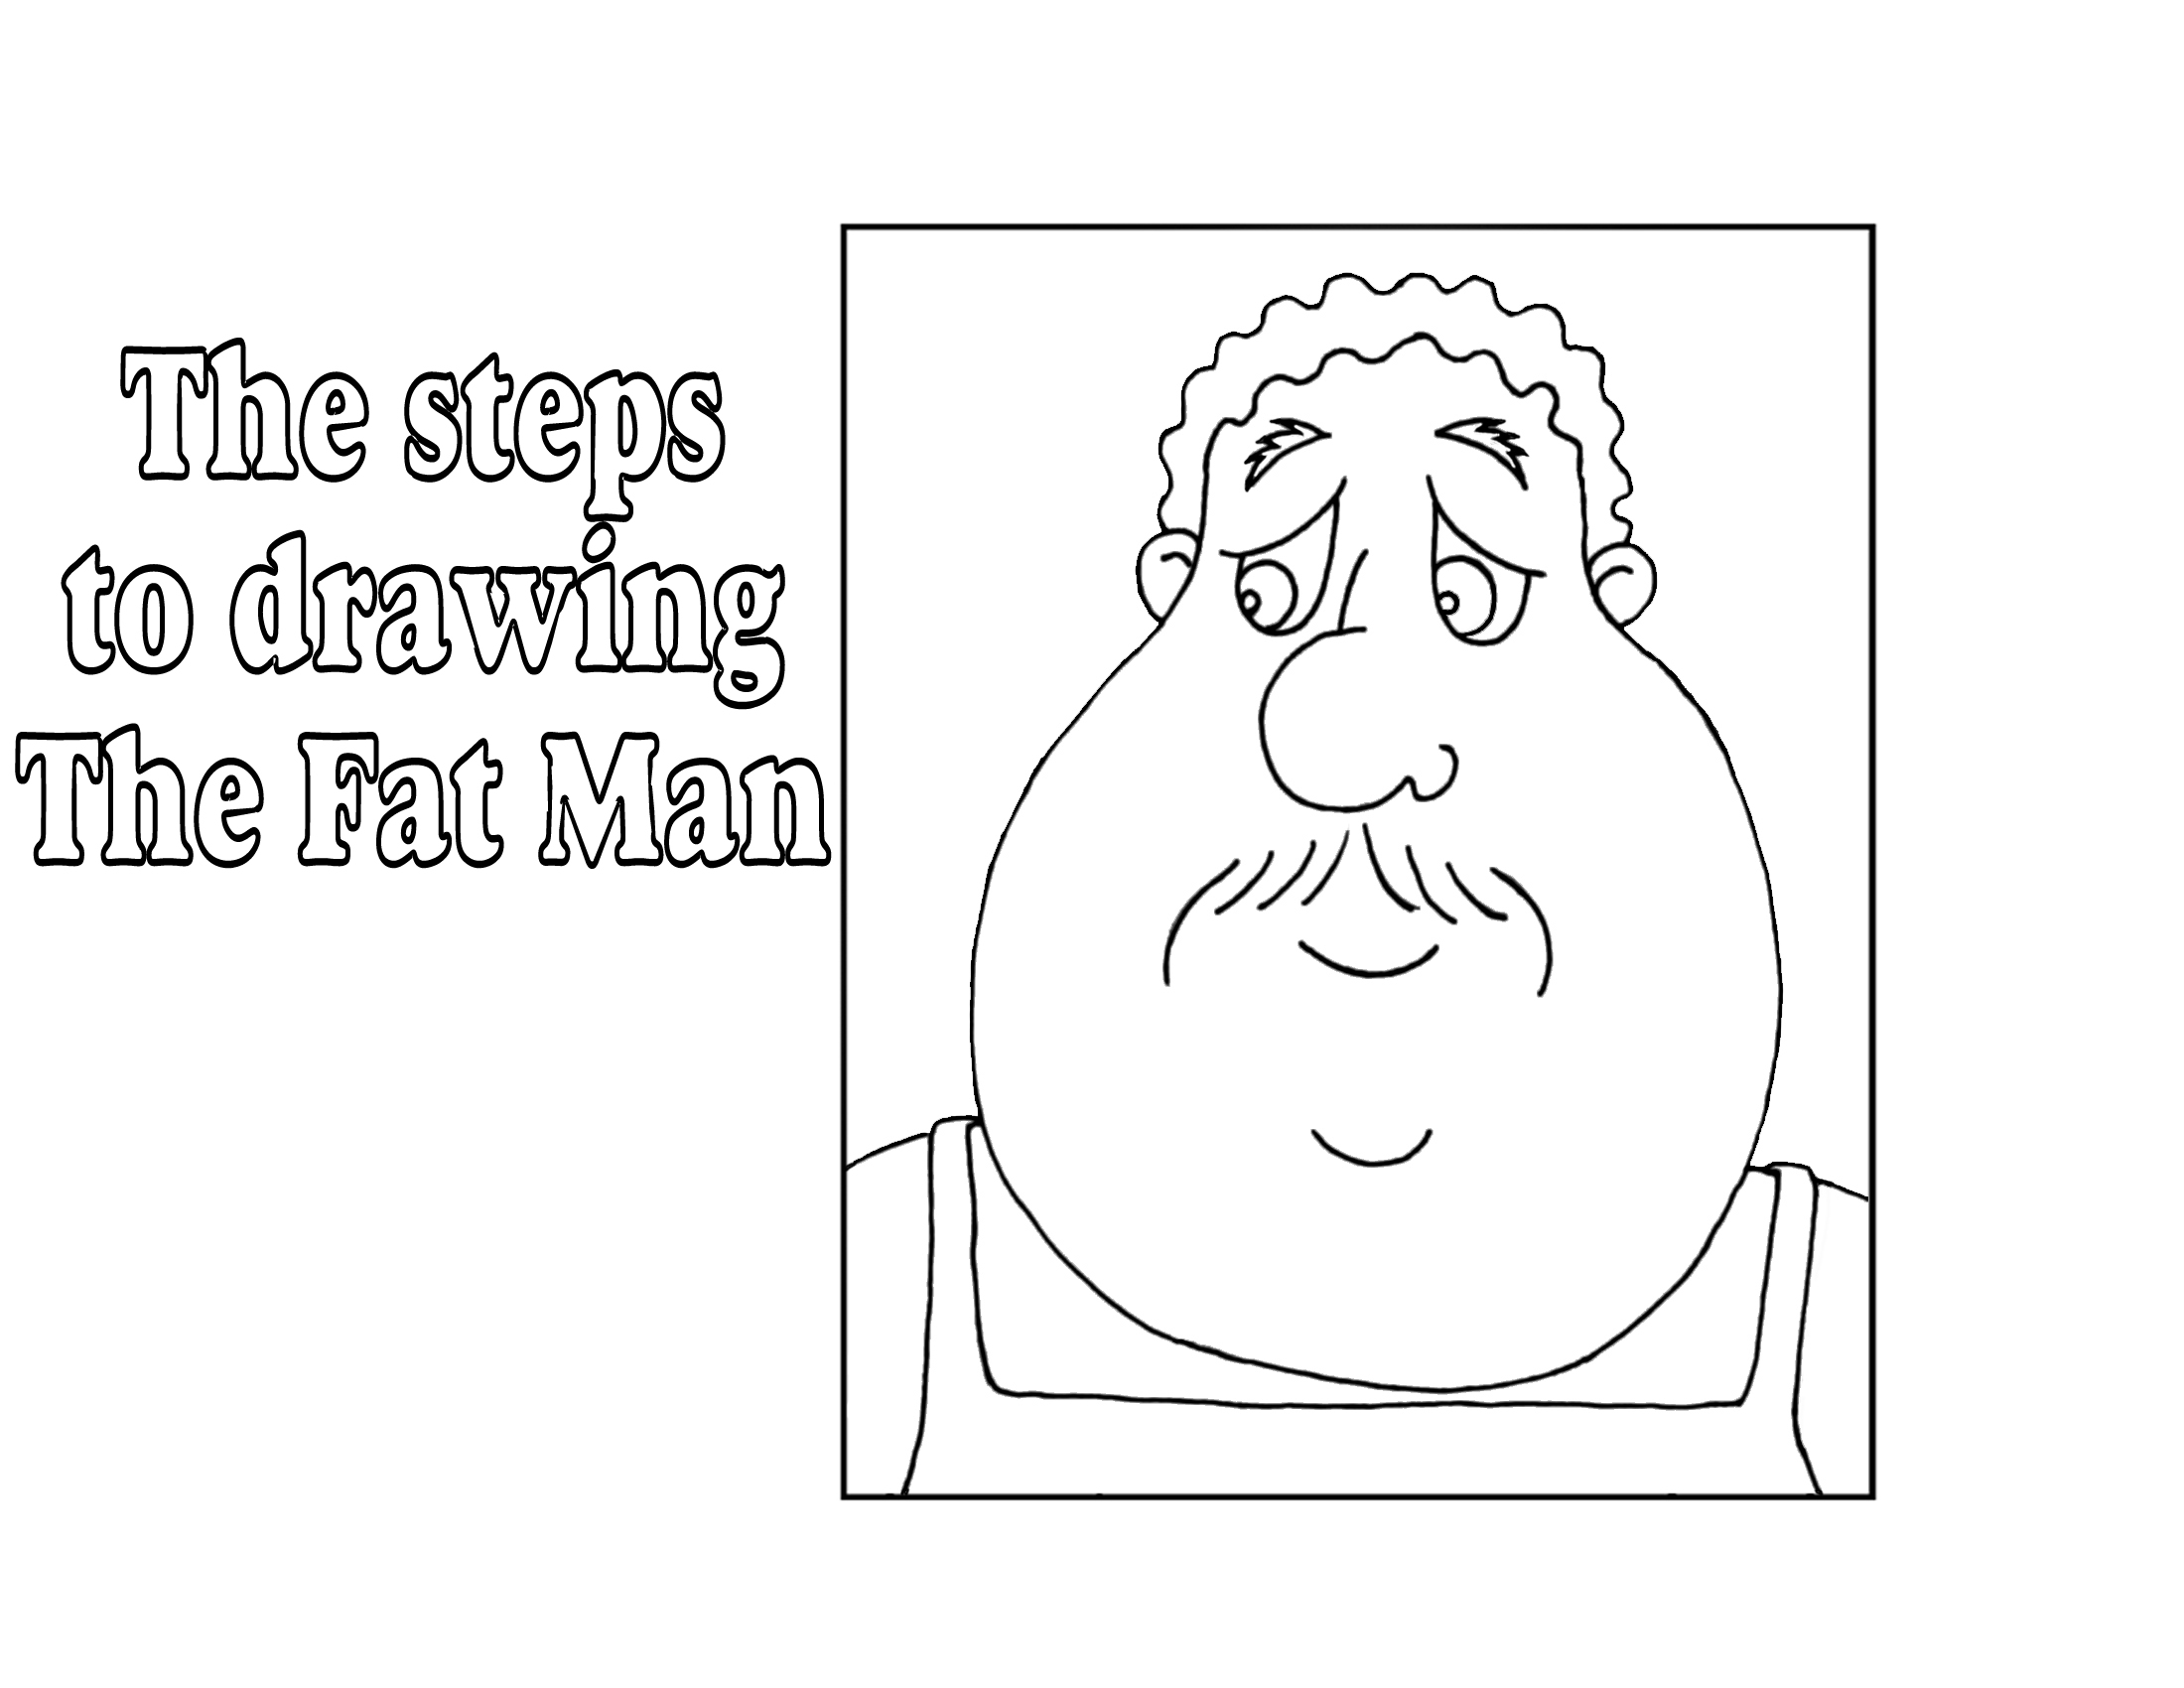 How to draw a fat man.